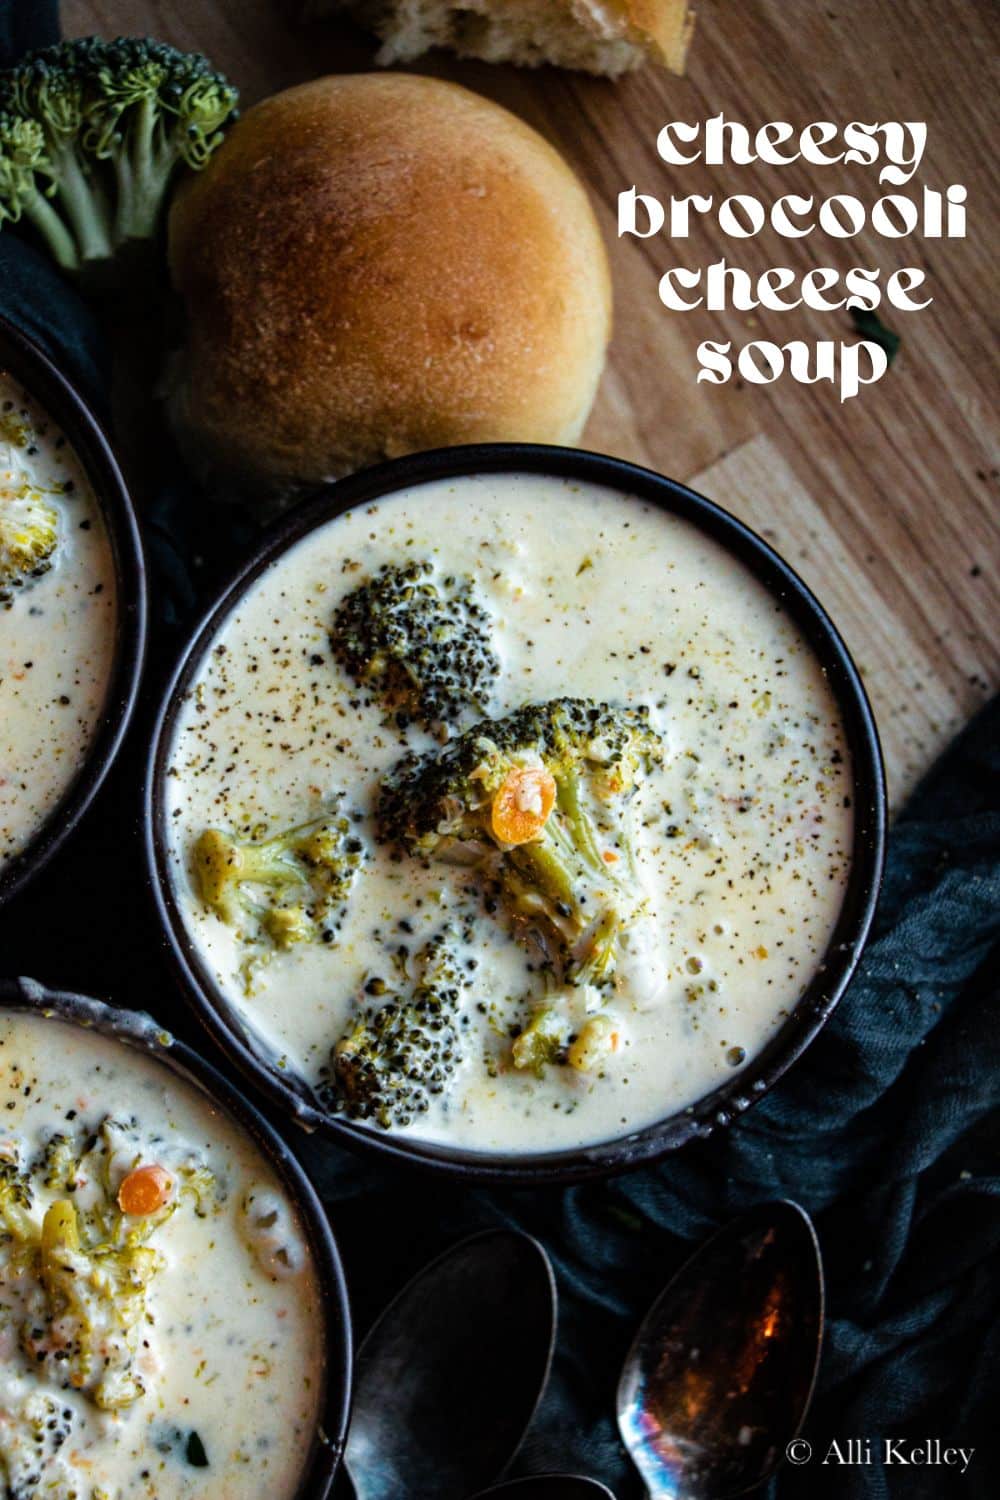 A real warming classic, this broccoli cheddar soup is the best comfort food! With its irresistible combination of savory cheddar cheese and tender broccoli - cheddar broccoli soup is the perfect mix of cheesy goodness and a hearty veggie meal. 